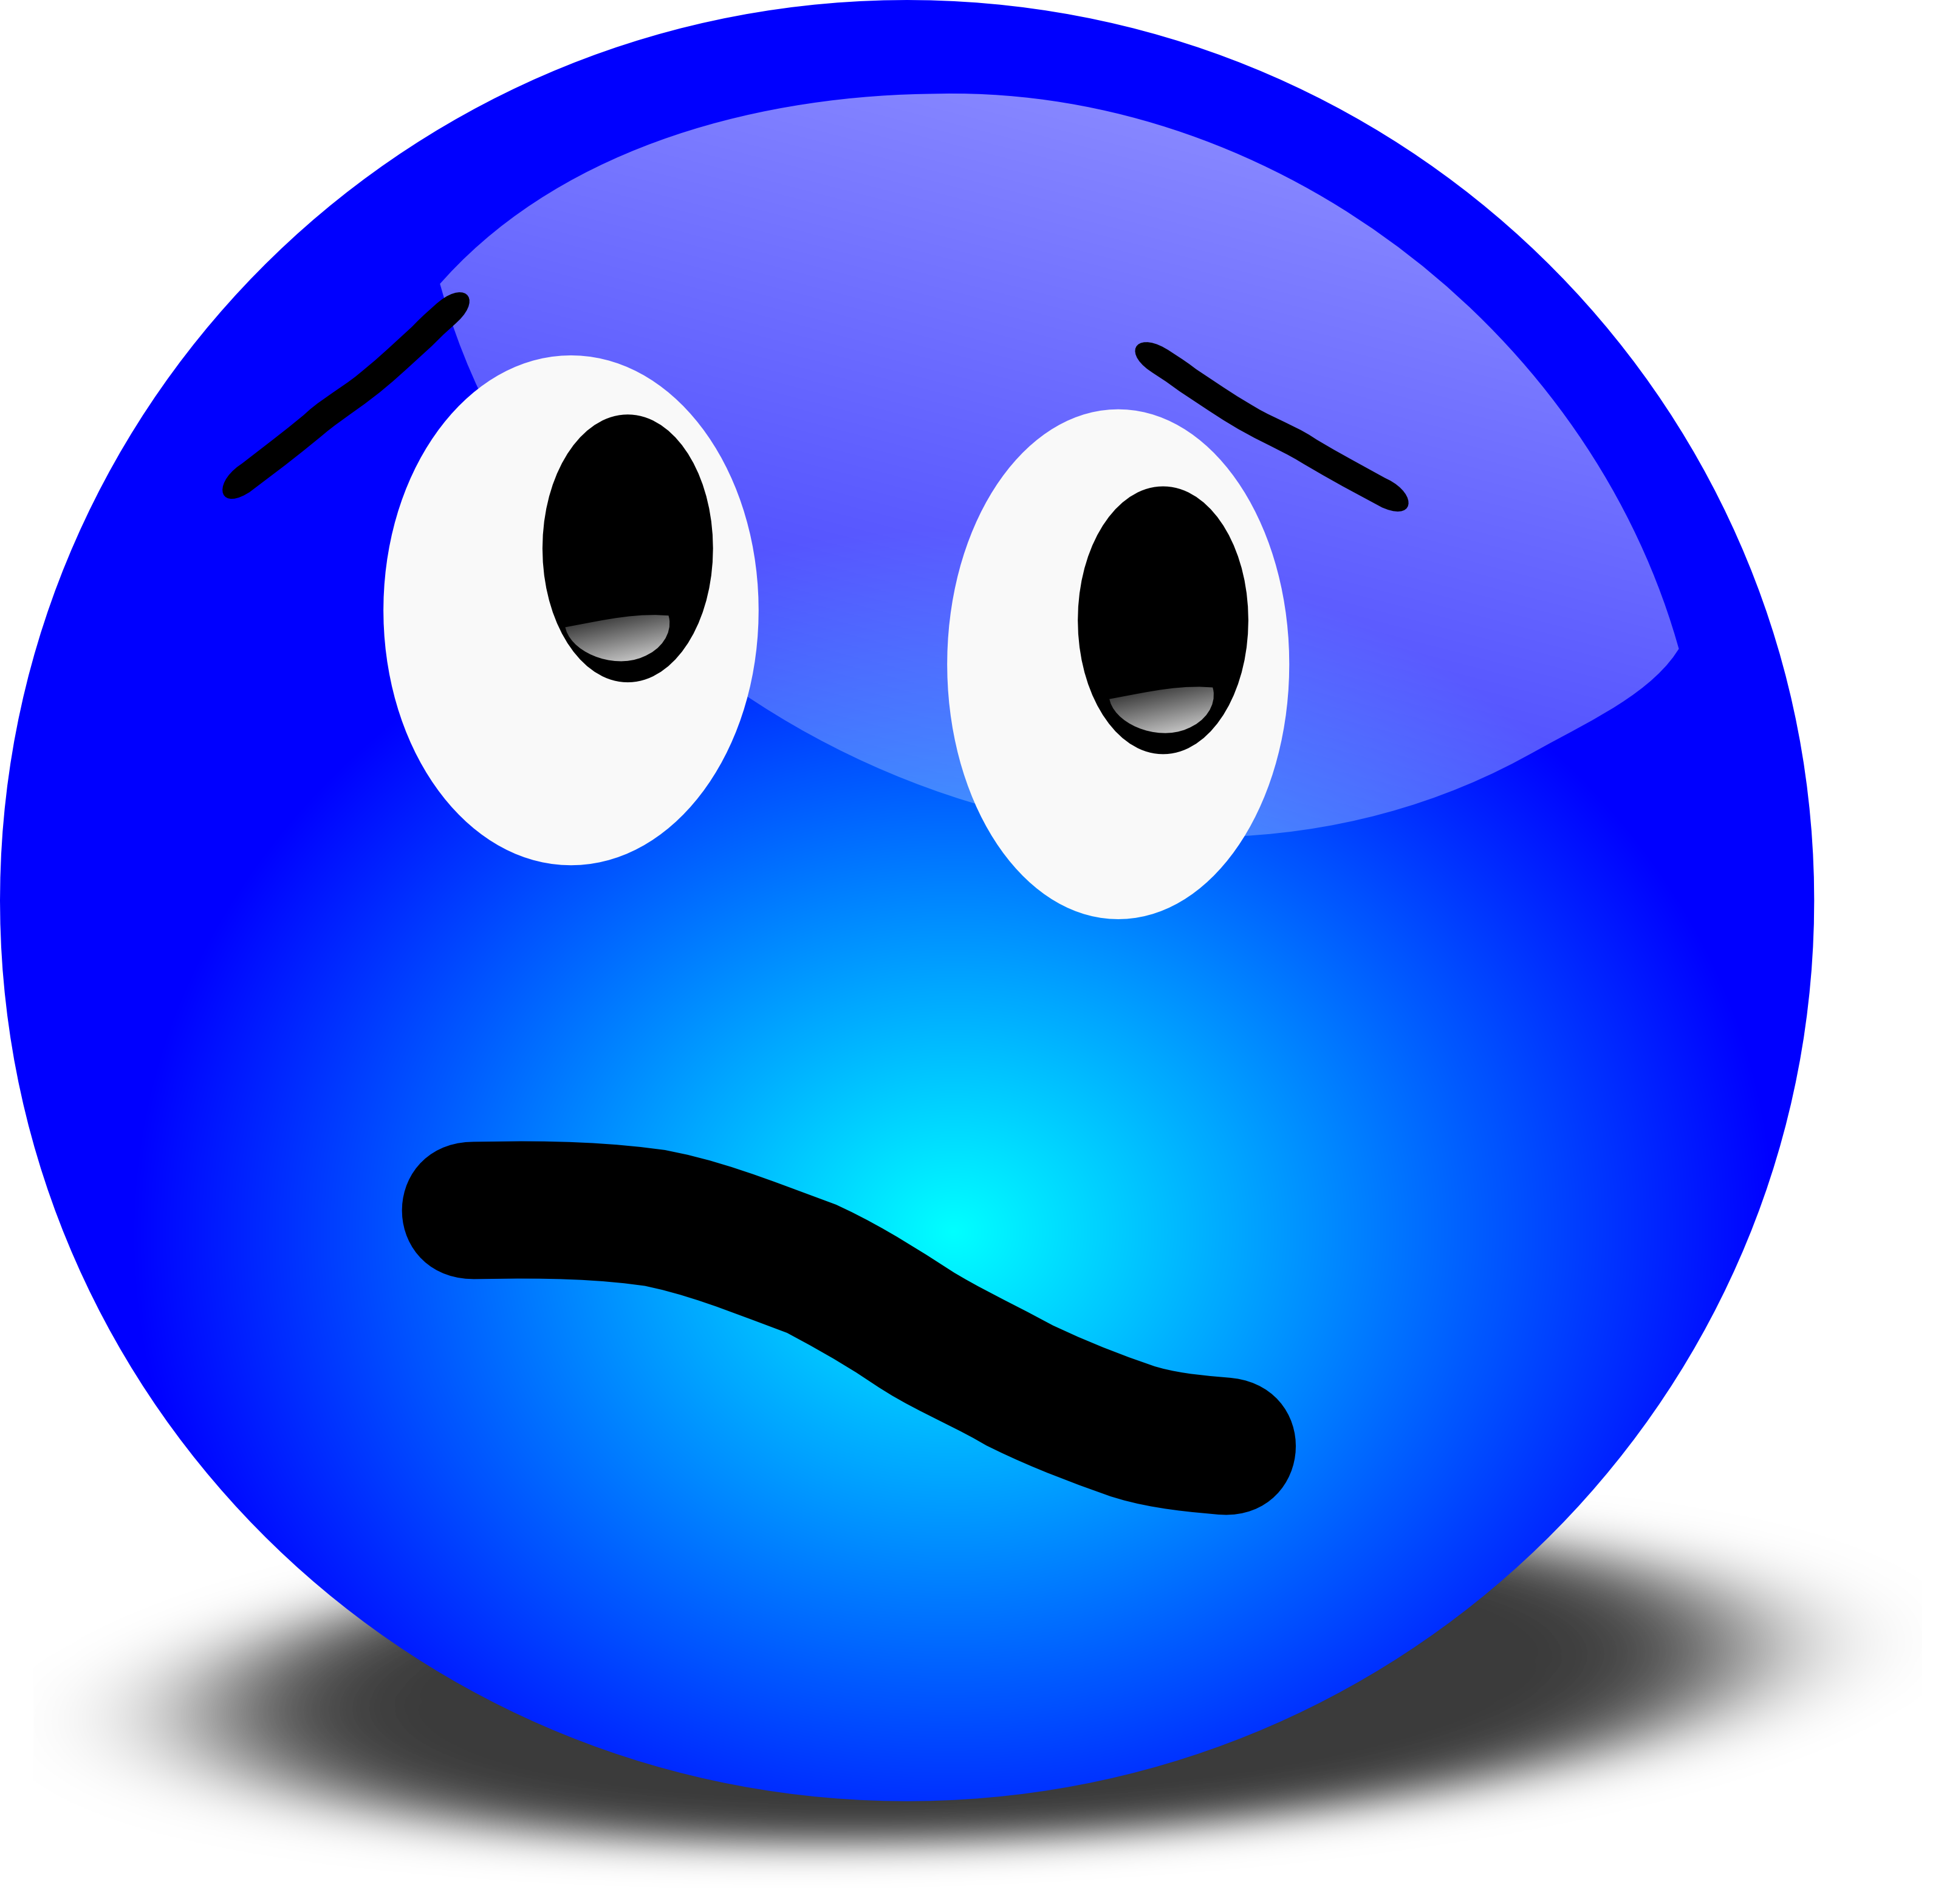 81-Confused-Blue-Smiley-Free-3D-Vector-Clipart-Illustration